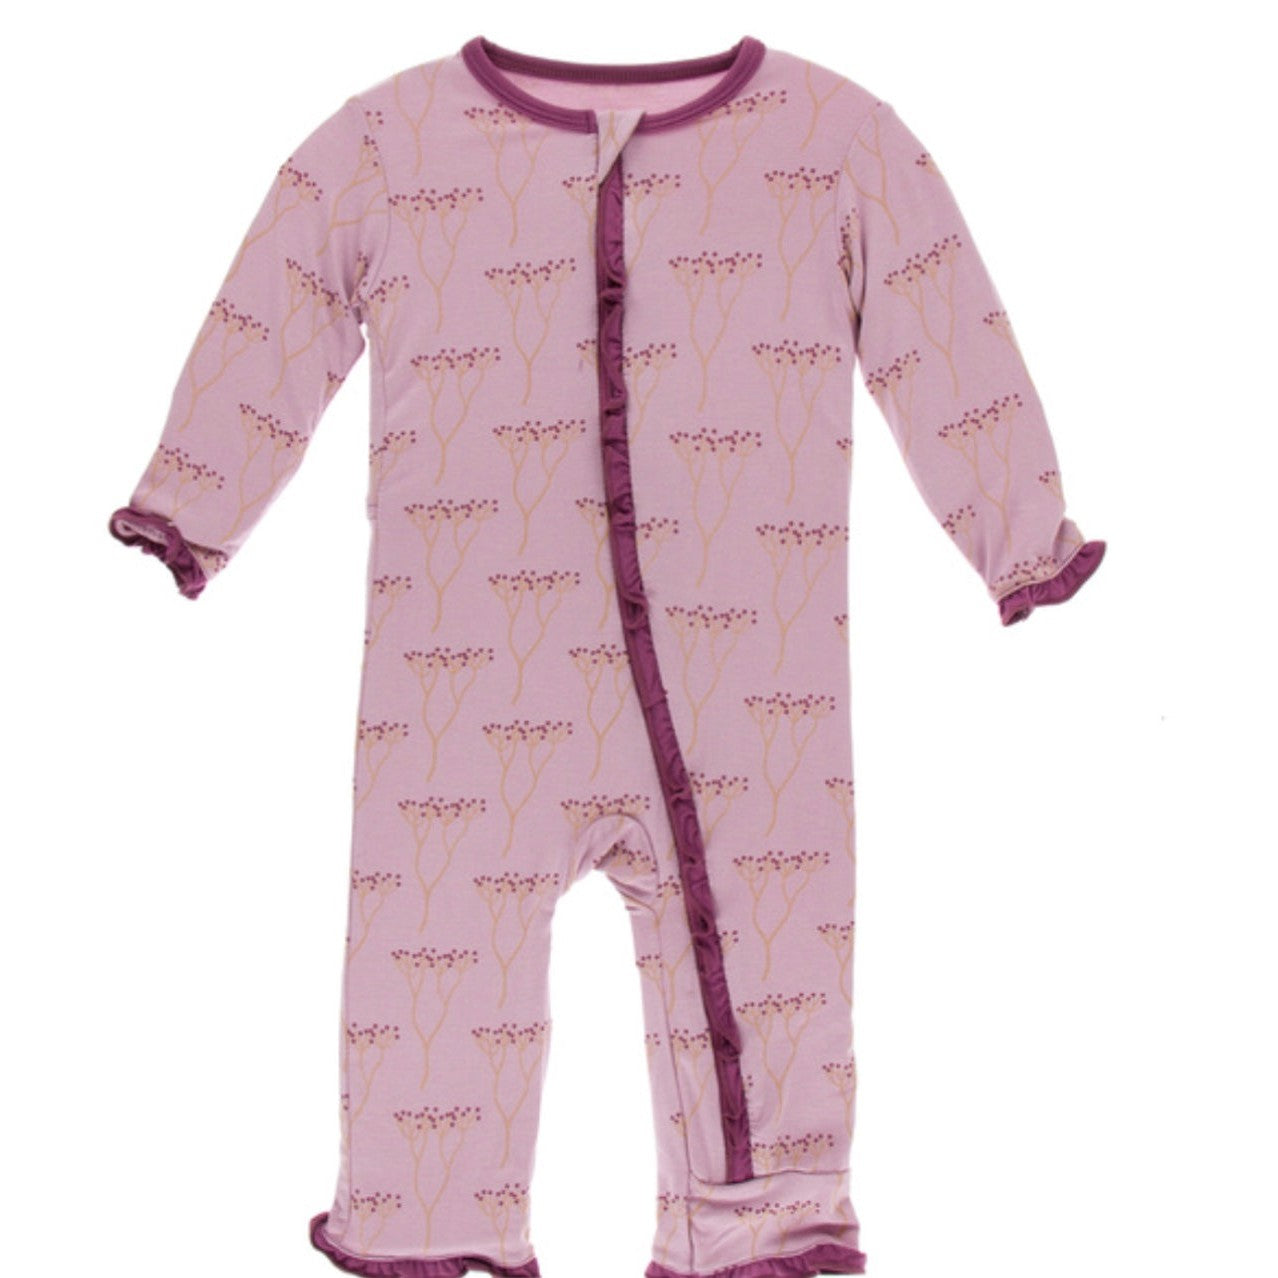 Classic Ruffle Coverall with 2 Way Zipper | Baby Shower Emily Gates